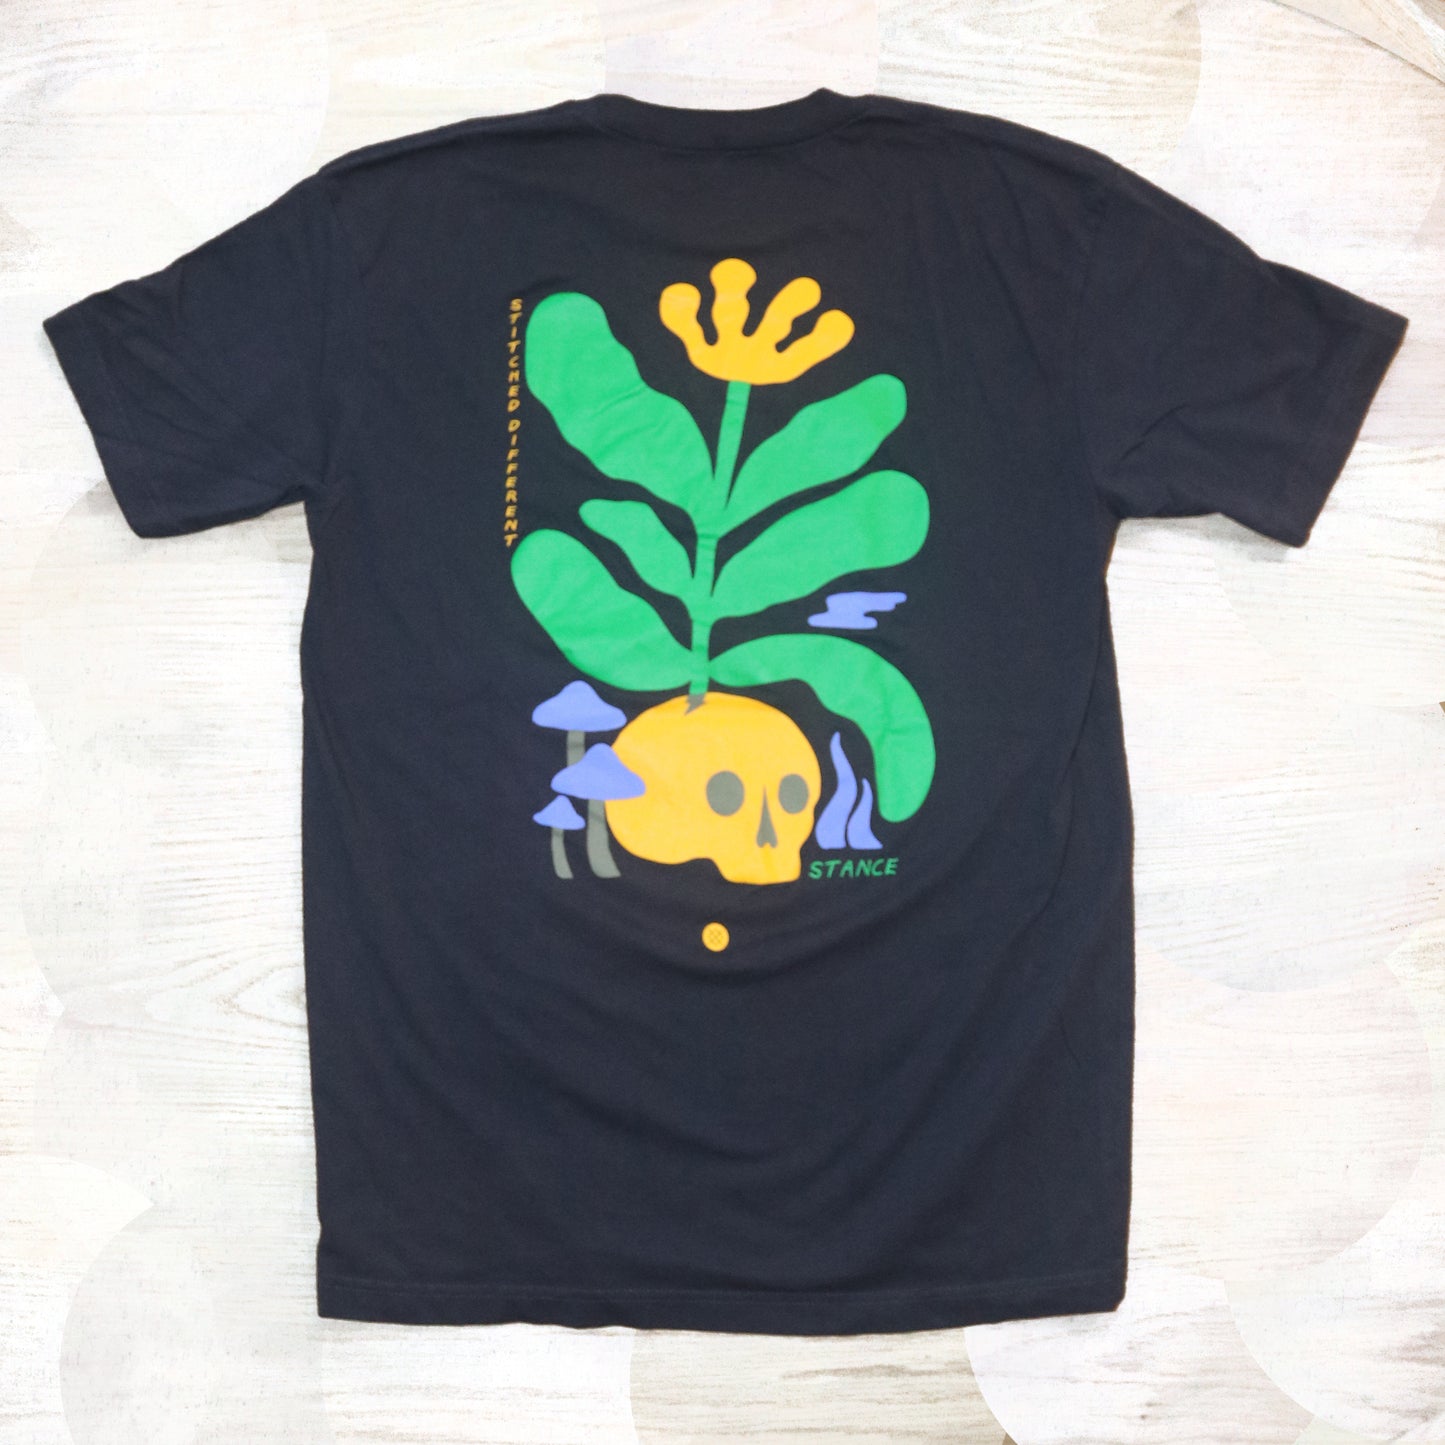 Stance Flower Growing Out of a Skull Shirt - Large